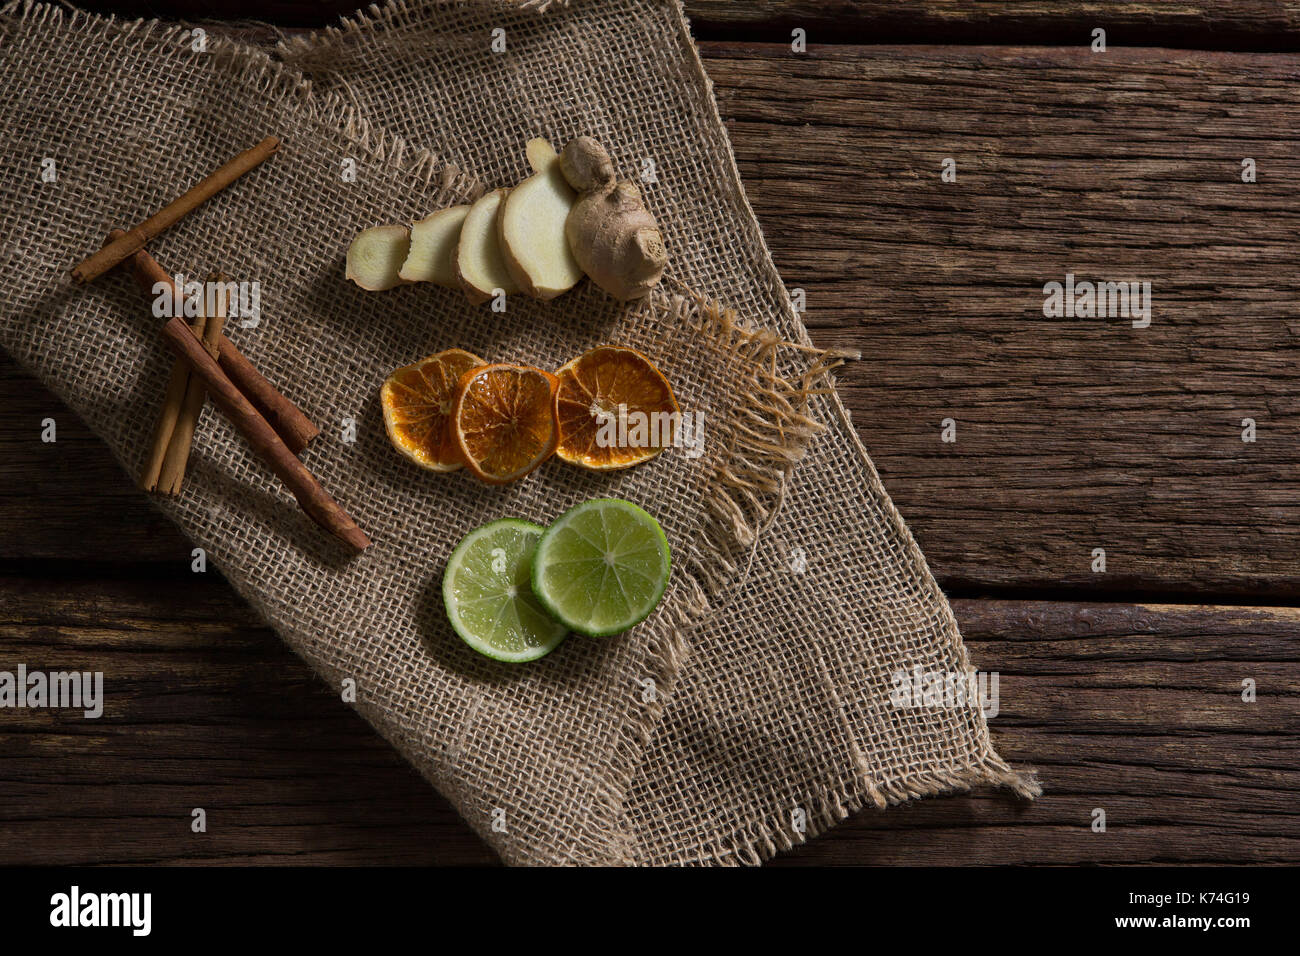 Overhead of sliced ginger, dried orange and lemon with cinnamon stick on textile Stock Photo